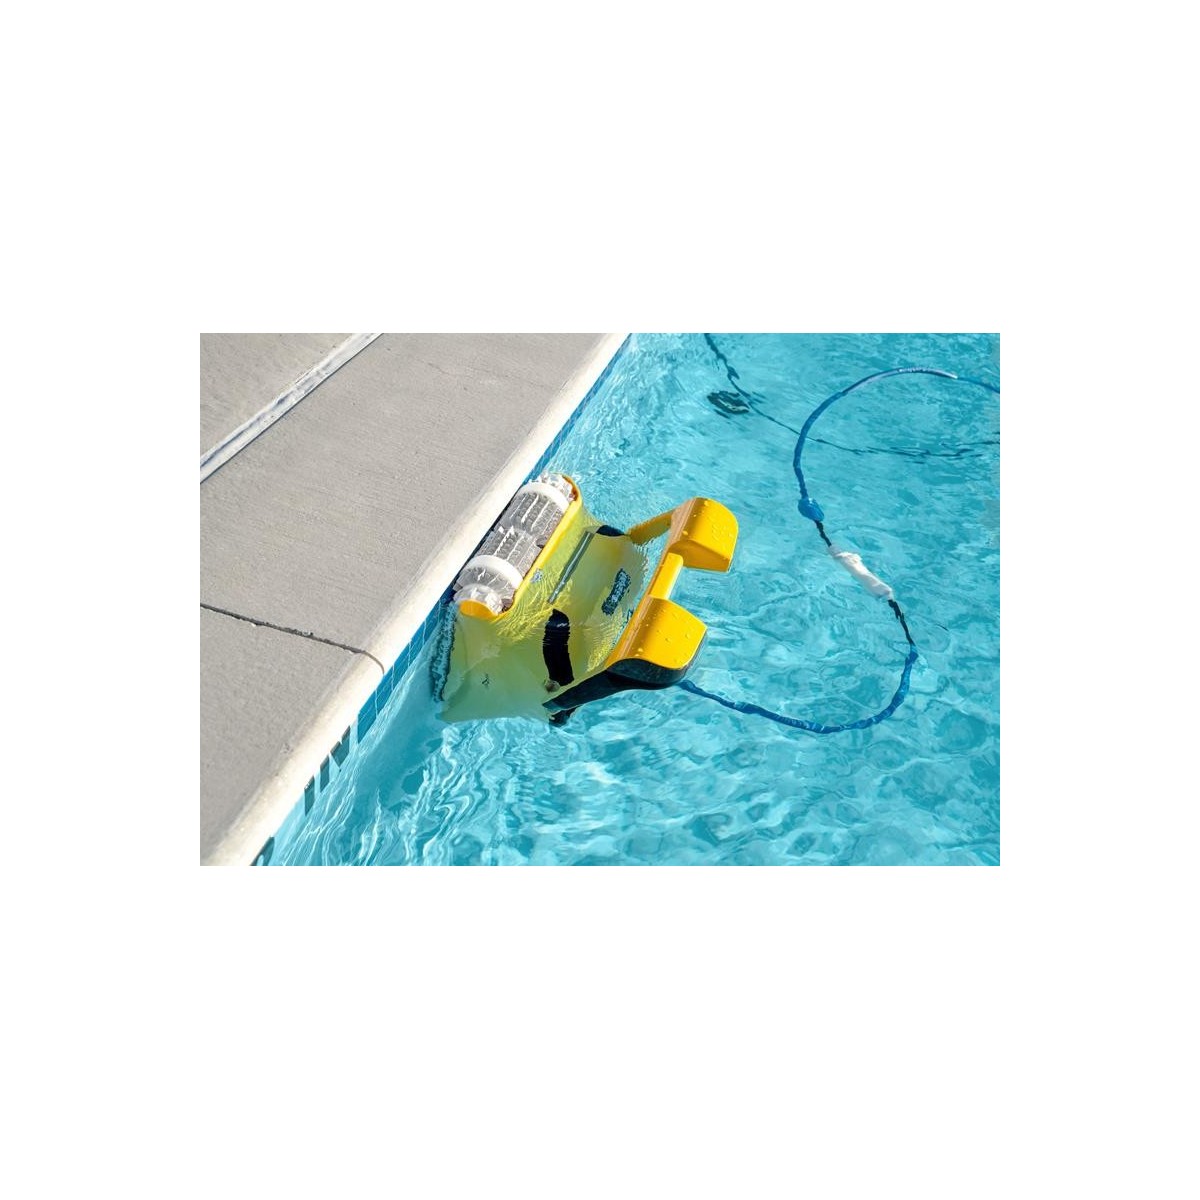 Buy Robotic pool cleaner Dolphin Wave 80 online |